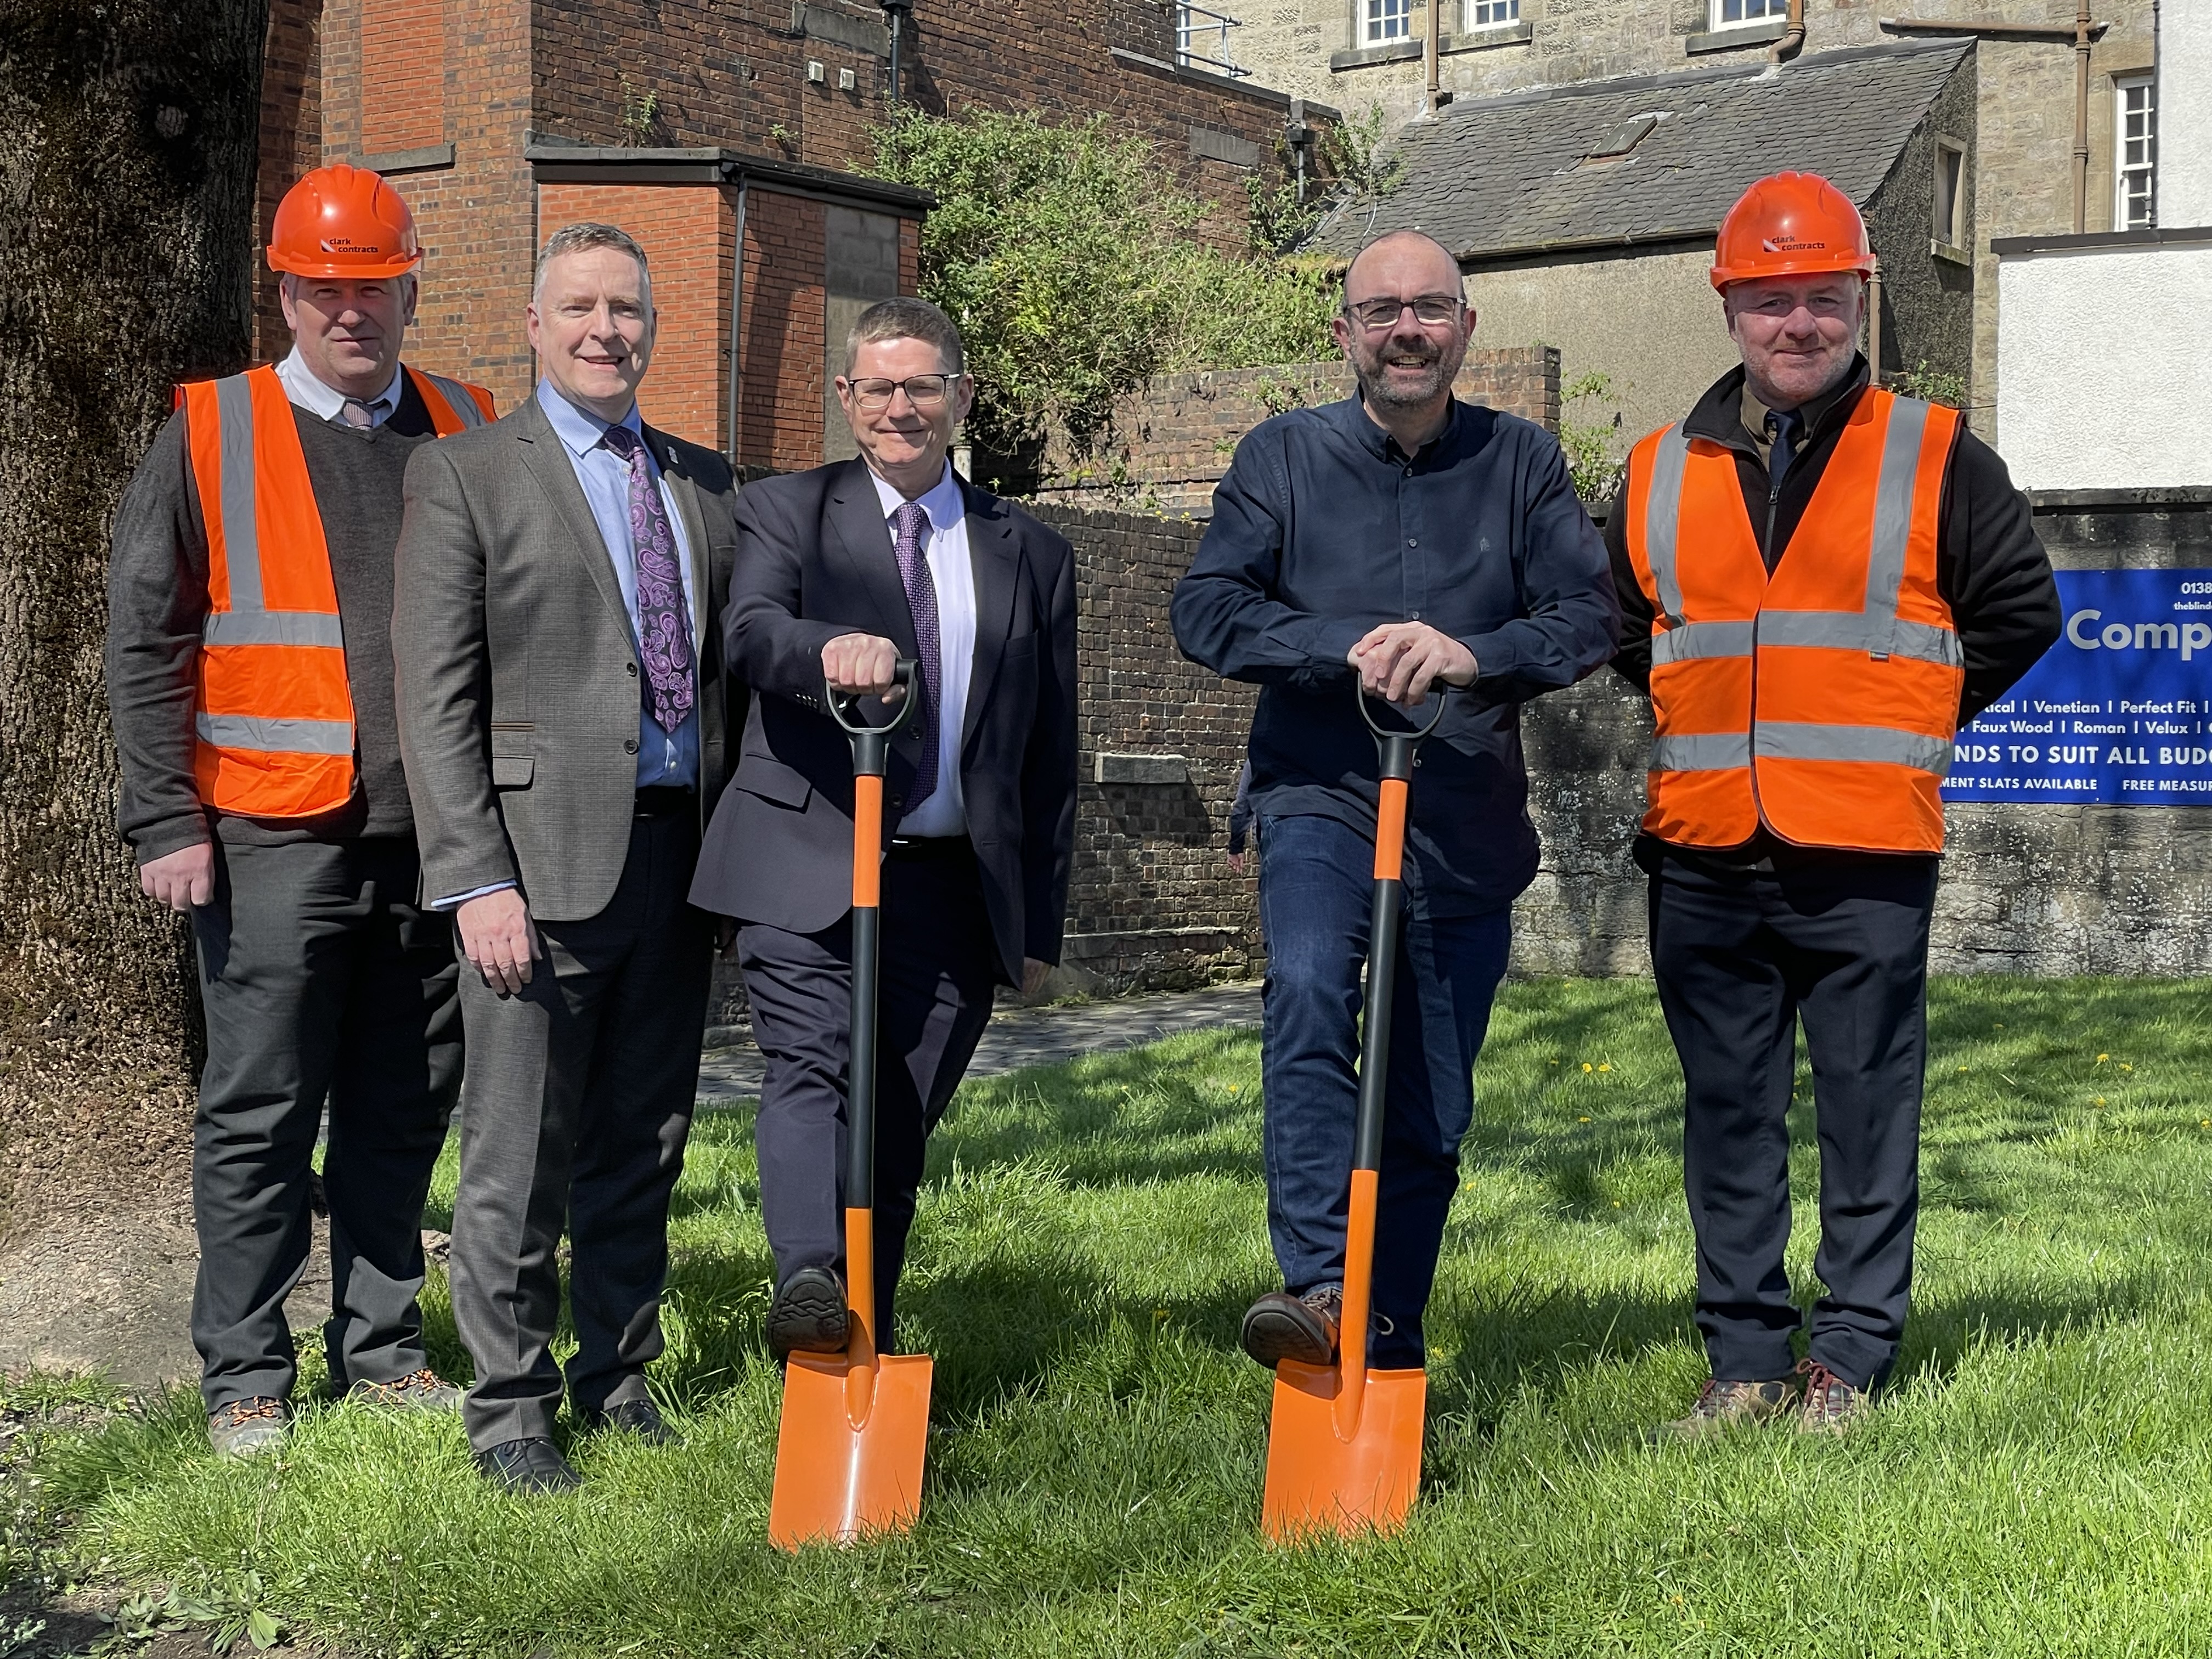 Glencairn House site works begin - Chief executive Peter Hesset, Councillor Mcbride and Martin Rooney and workers